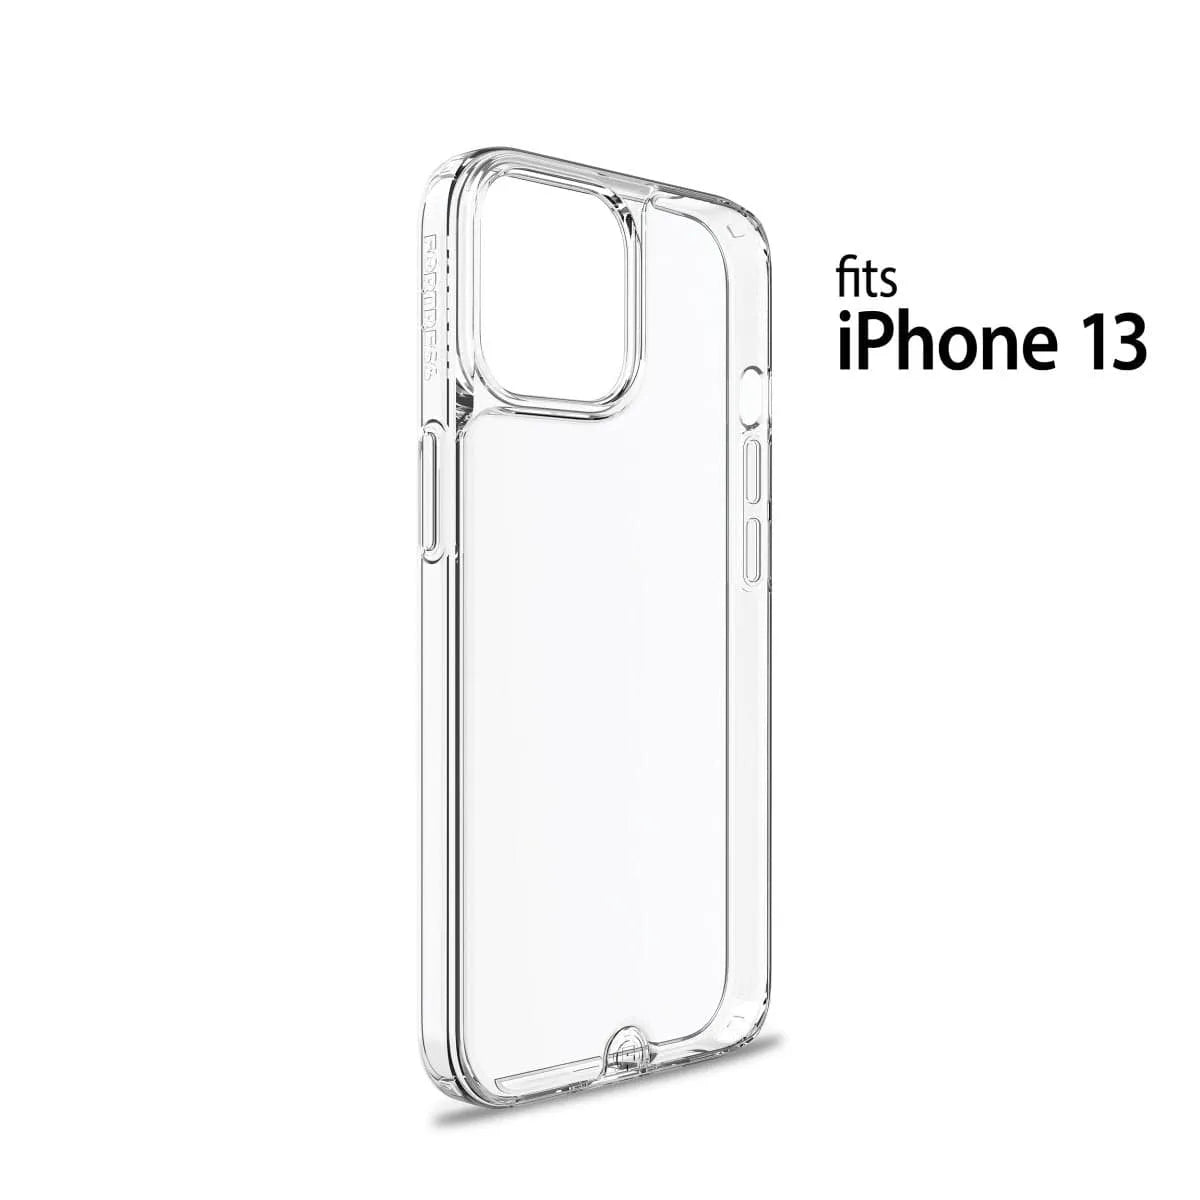 Fortress Fortress Infinite Glass Case for iPhone 13  Scooch Infinite Glass